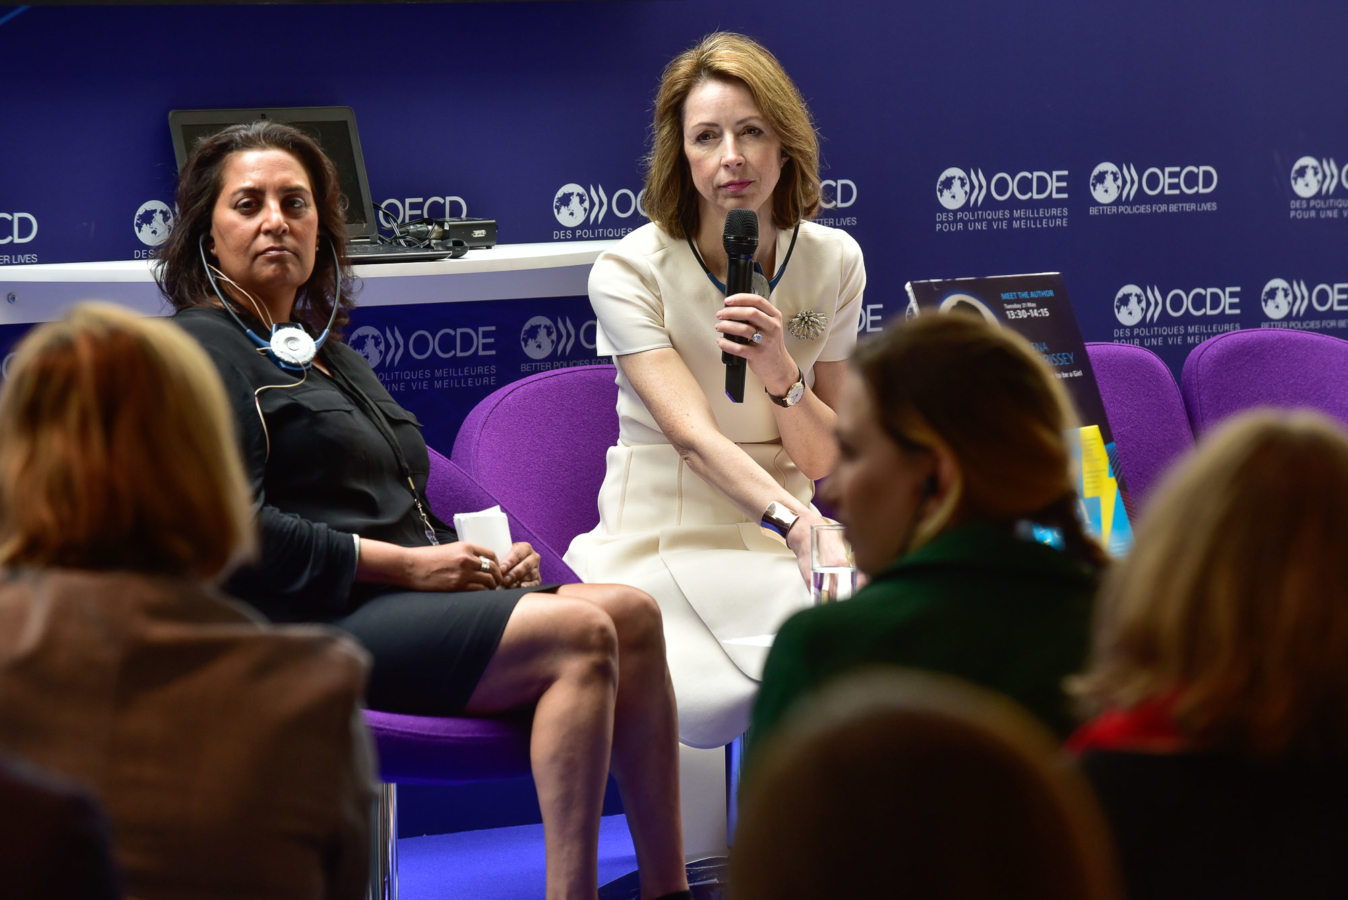 21 May 2019 - OECD Forum: Meet the author. A good time to be a girl. Helena Morrissey, Founder, 30% Club; Author, A Good Time to be a GirlWith Farah Mohamed, Past CEO, Malala Fund; Founder, G(irls)20. OECD/Hubert Raguet